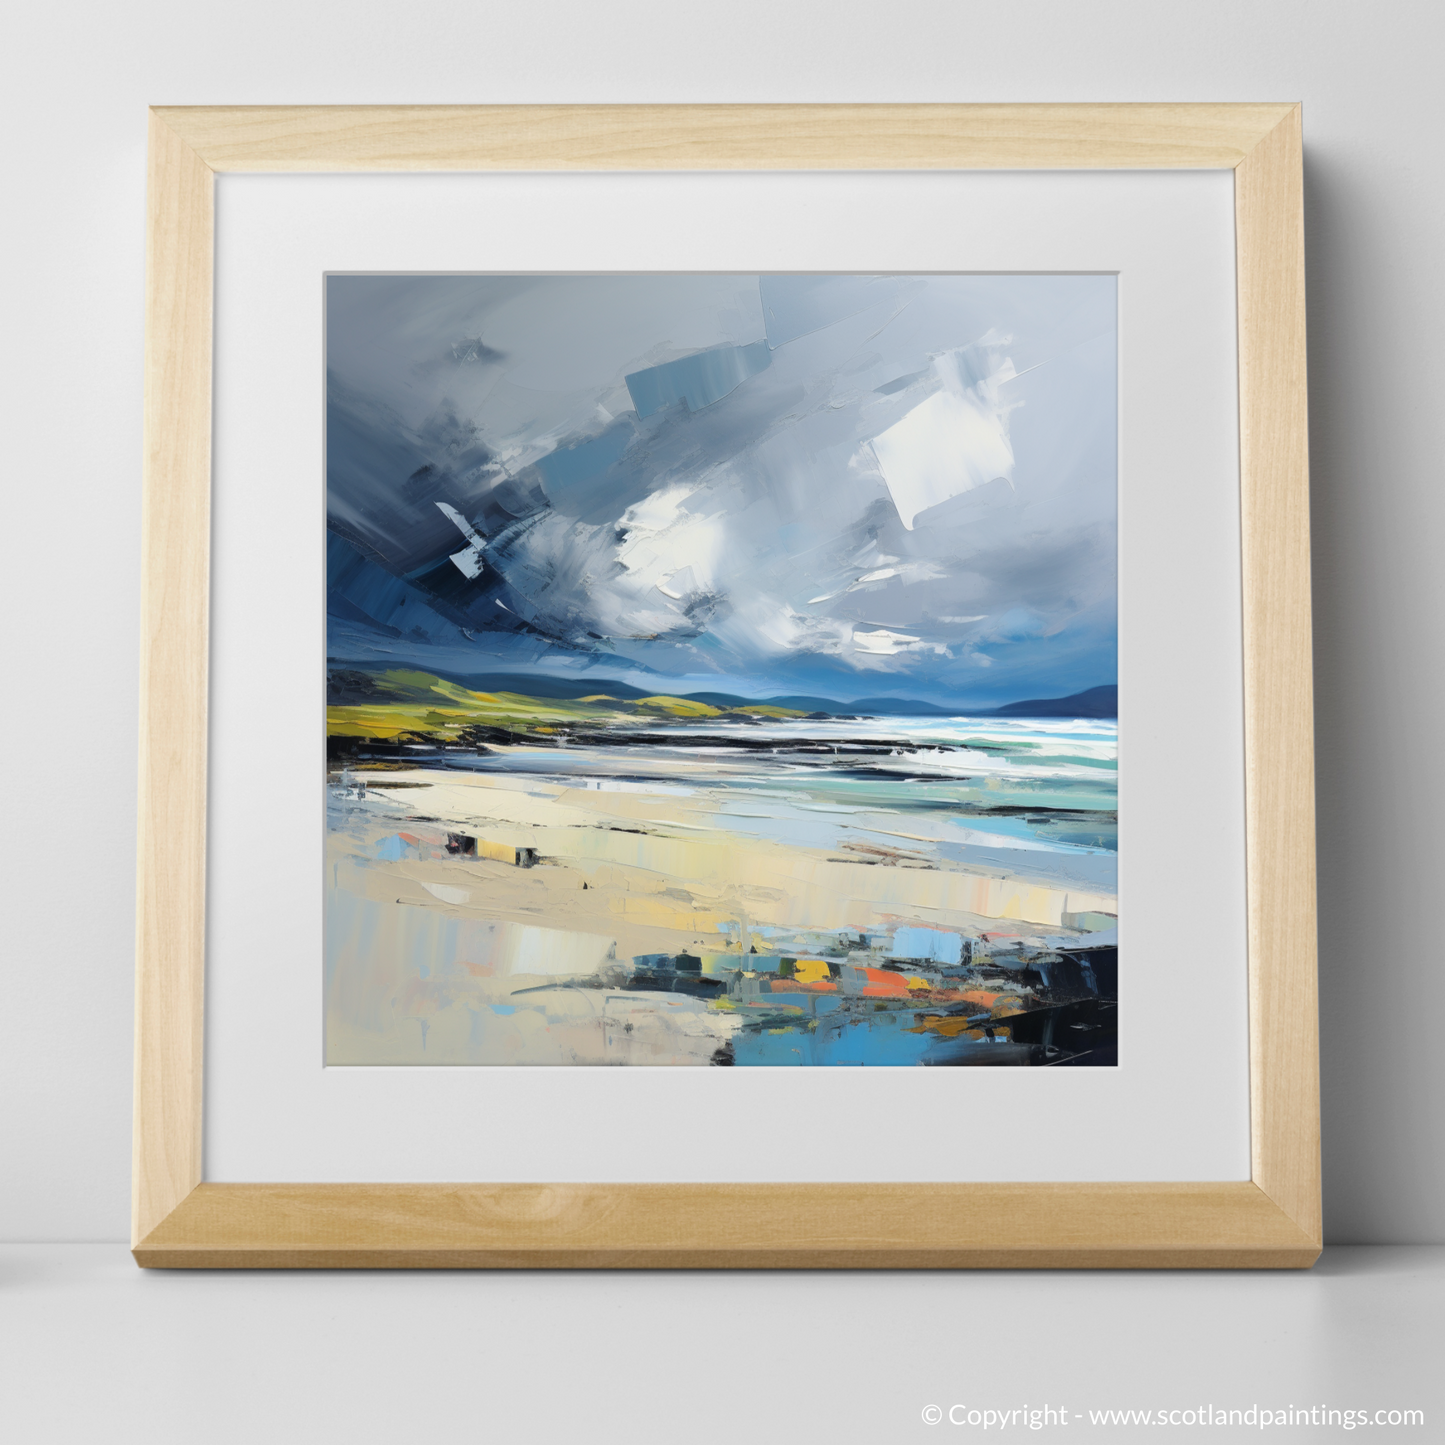 Art Print of Scarista Beach with a stormy sky with a natural frame